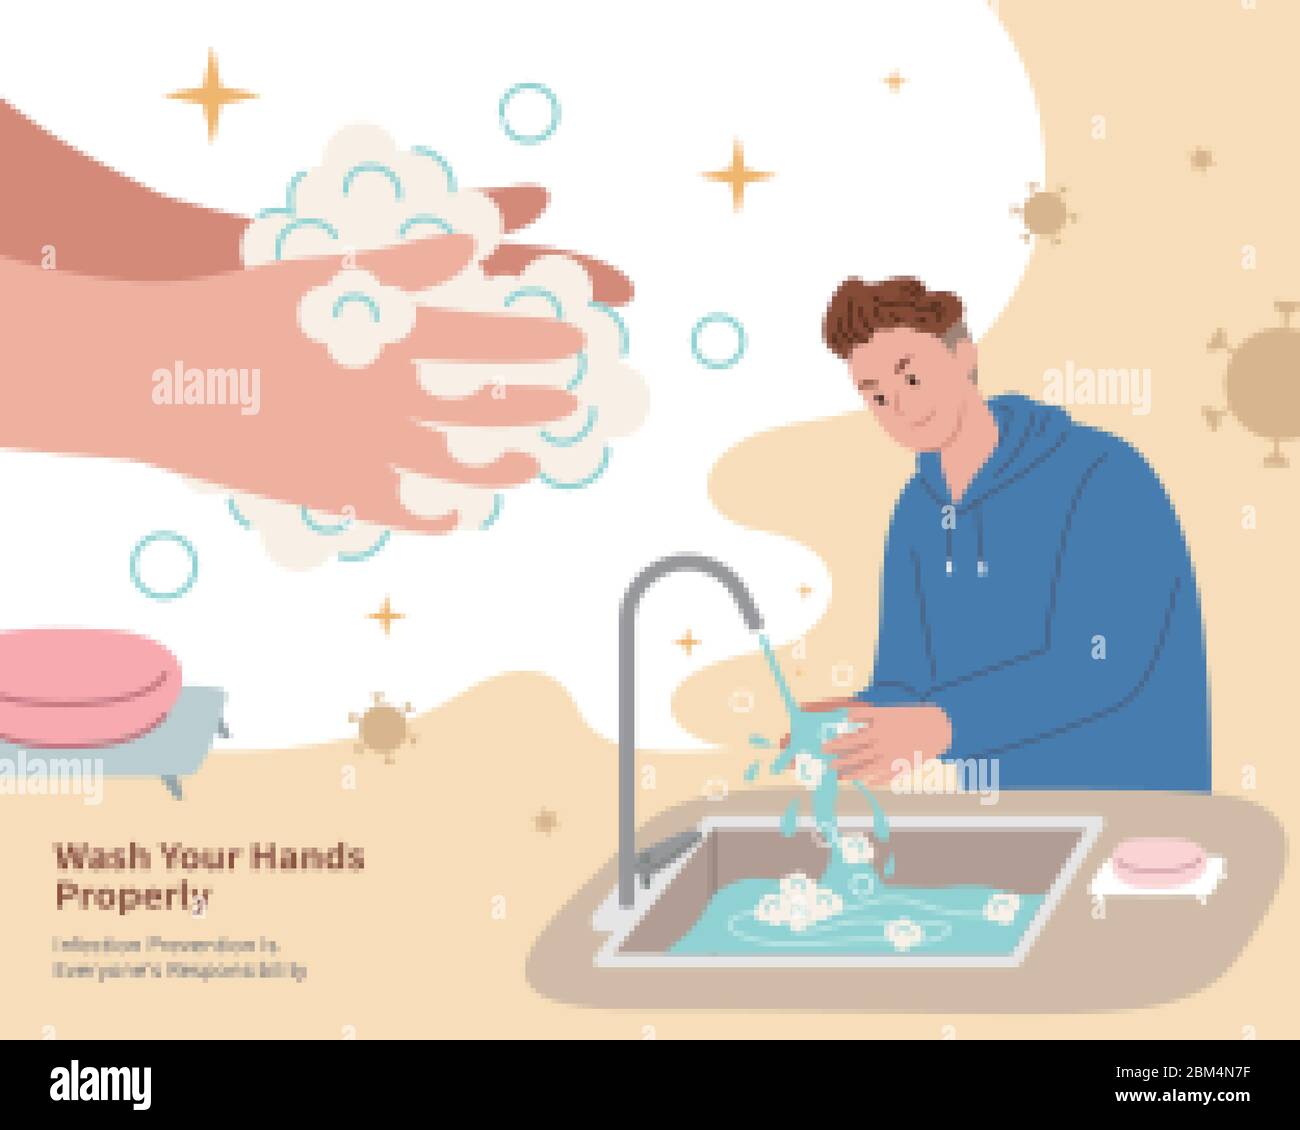 A man properly washing hands with soap to maintain hand hygiene protection against COVID-19 Stock Vector